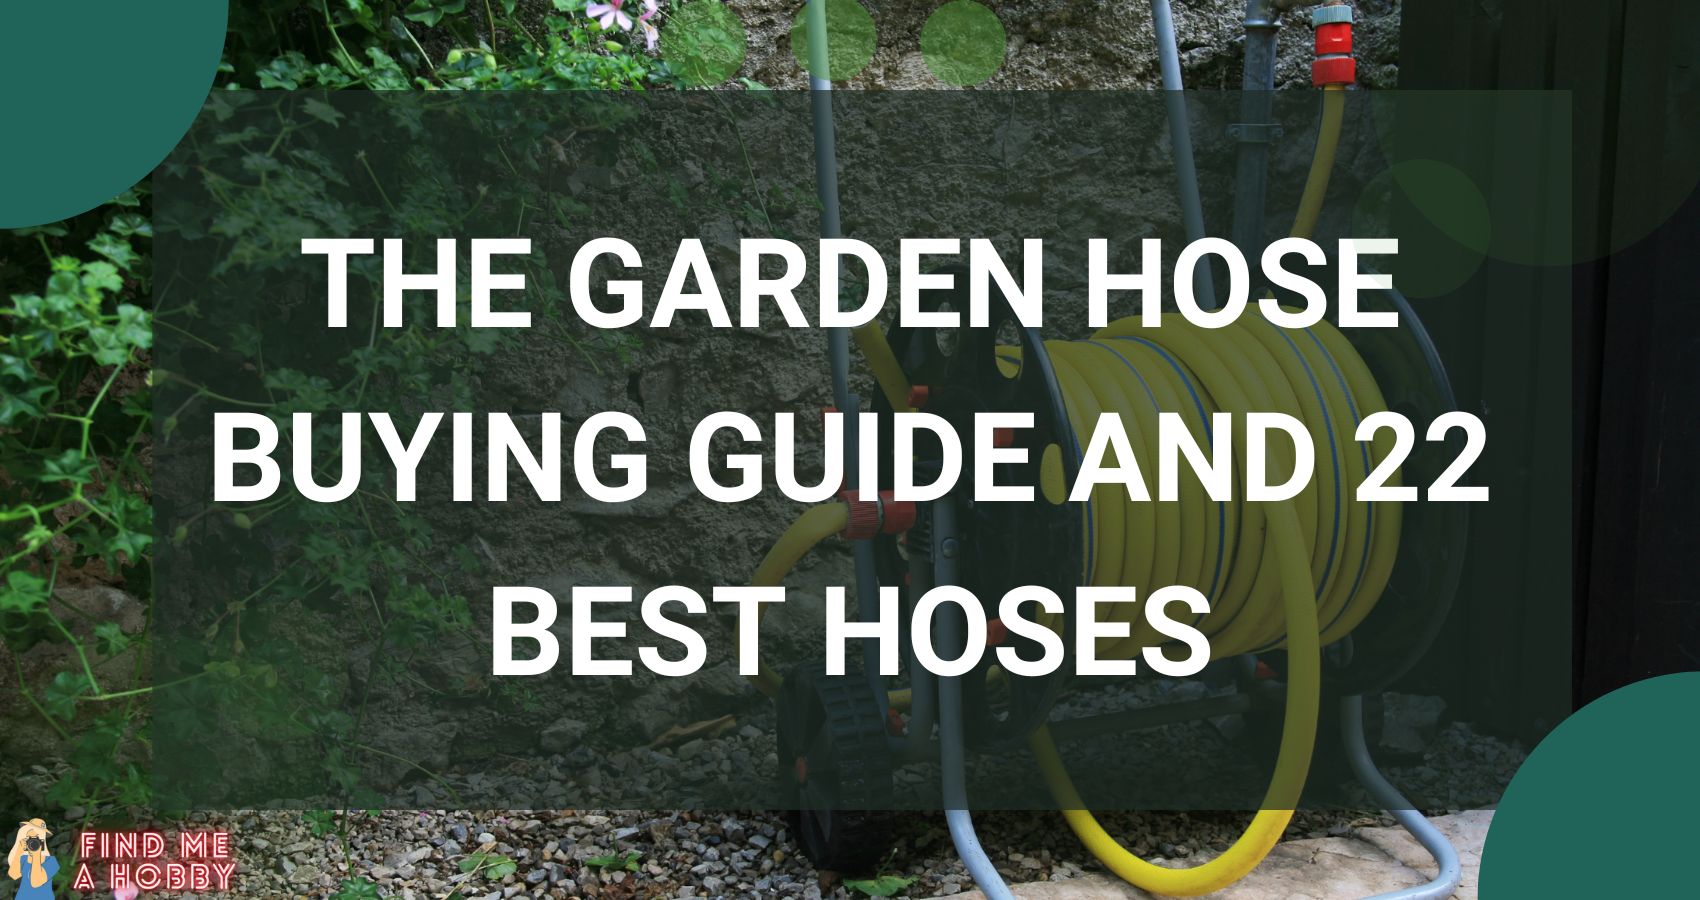 The Garden Hose Buying Guide and 22 Best Hoses